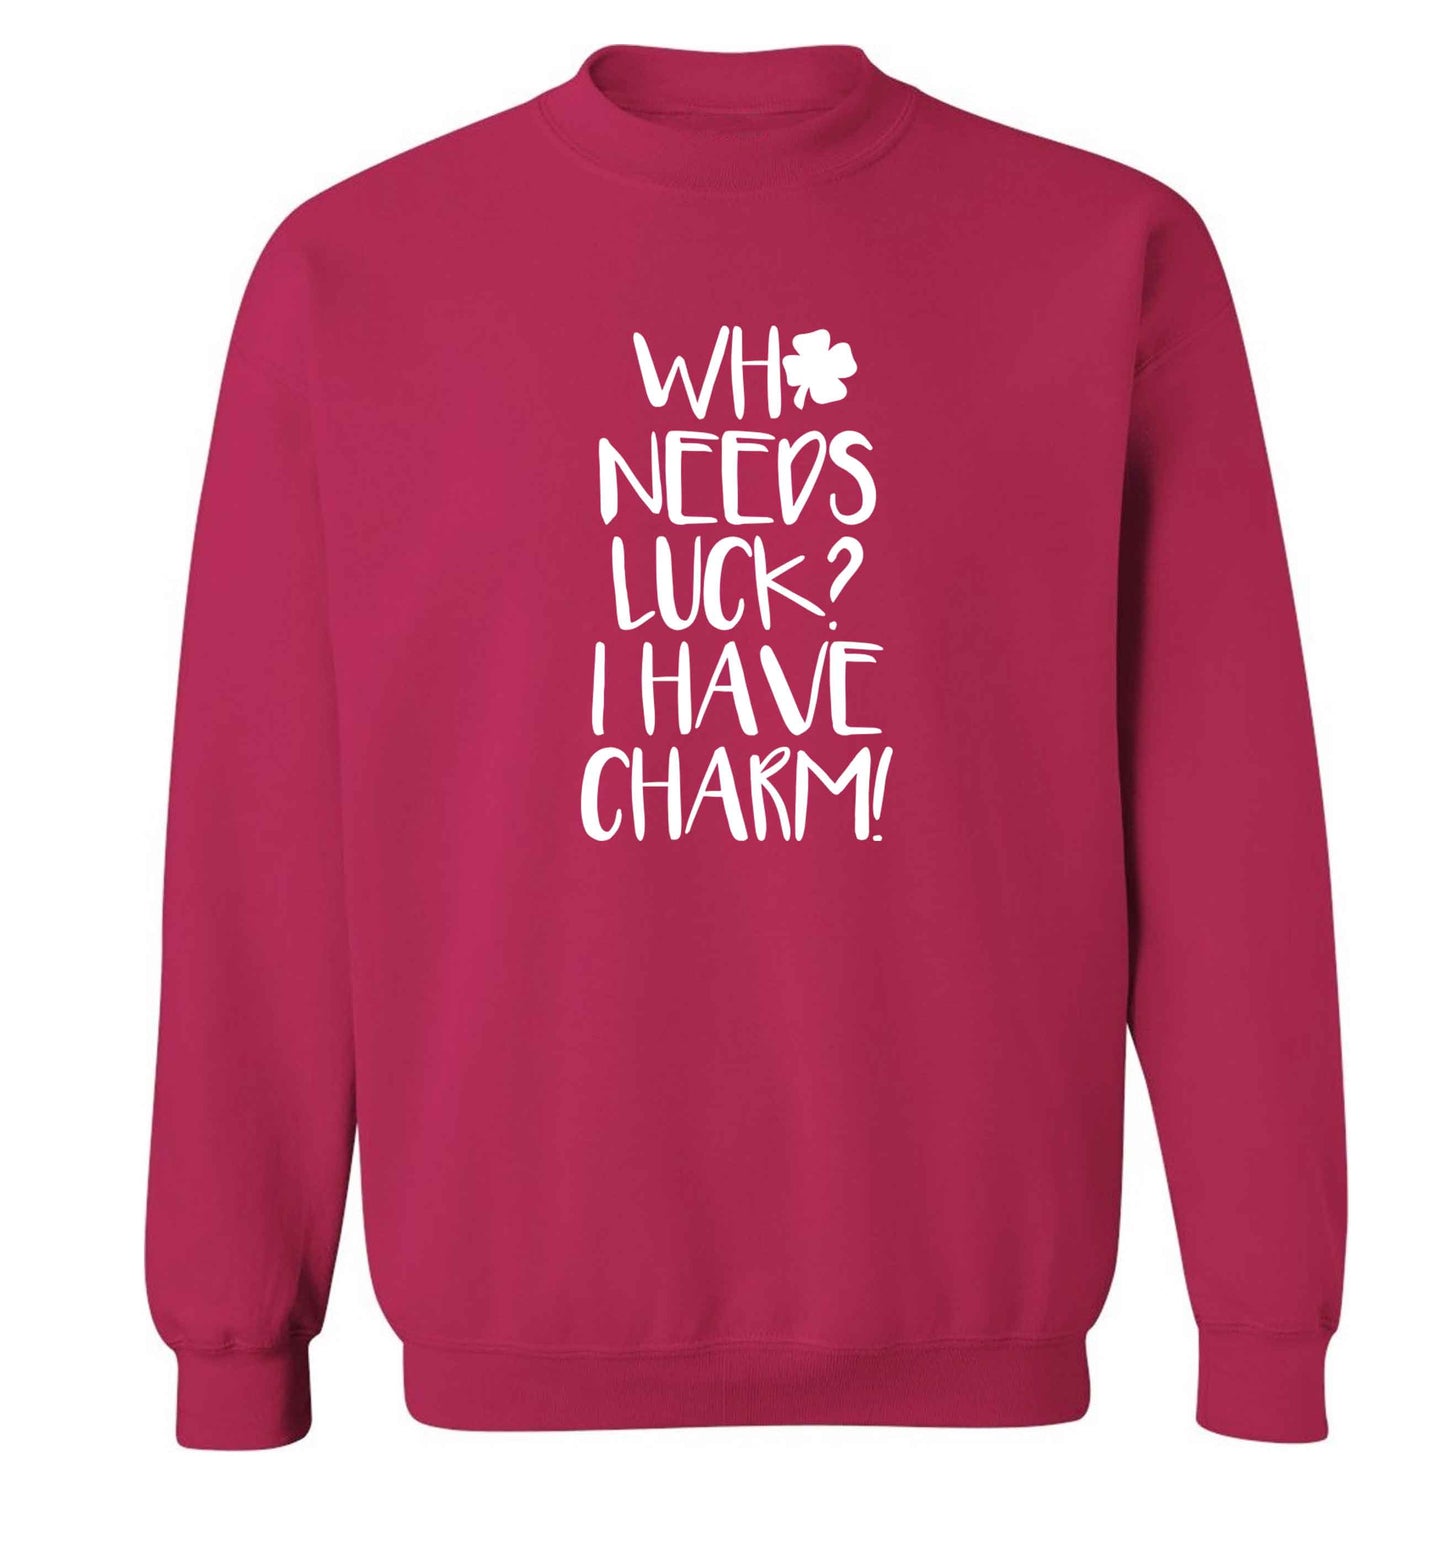 Who needs luck? I have charm! adult's unisex pink sweater 2XL